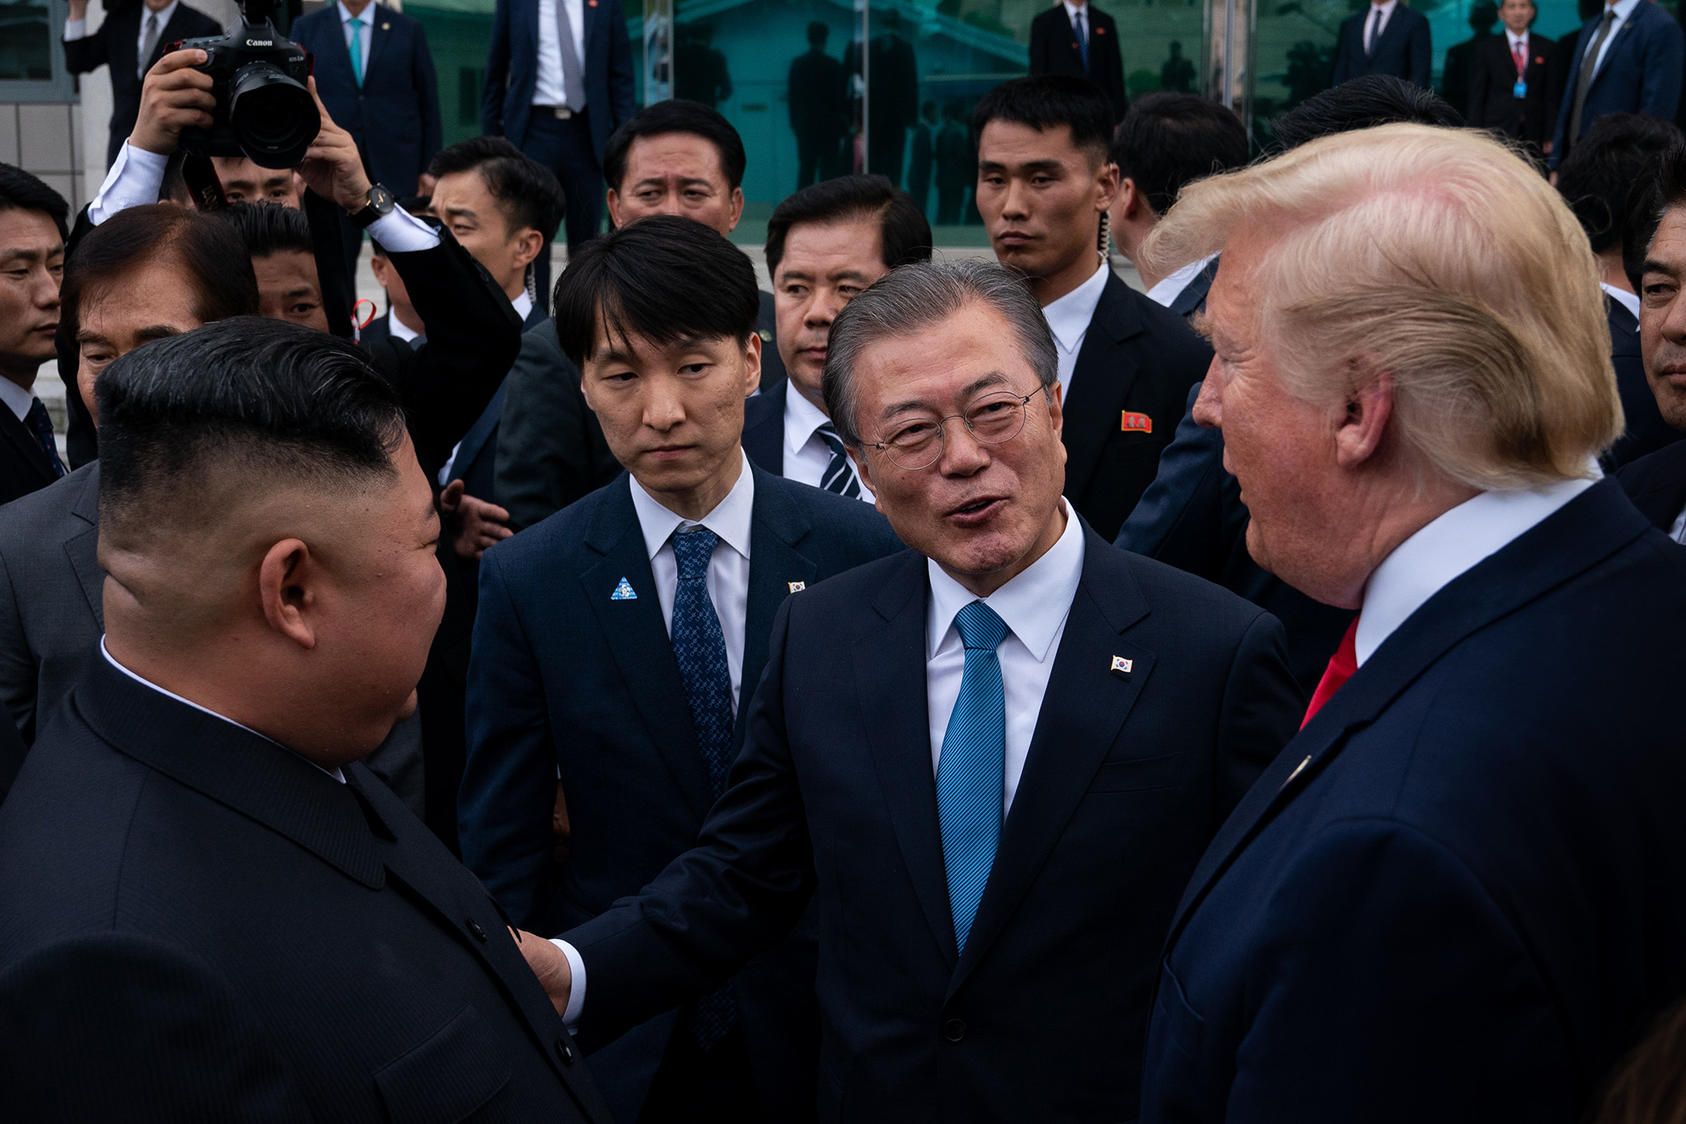 North Korea’s Kim Jong Un, South Korean President Moon Jae-in and President Donald Trump met at the Korean demilitarized zone in June 2019. North Korea is showing frustration at not winning its goals through diplomacy. (Erin Schaff/The New York Times)